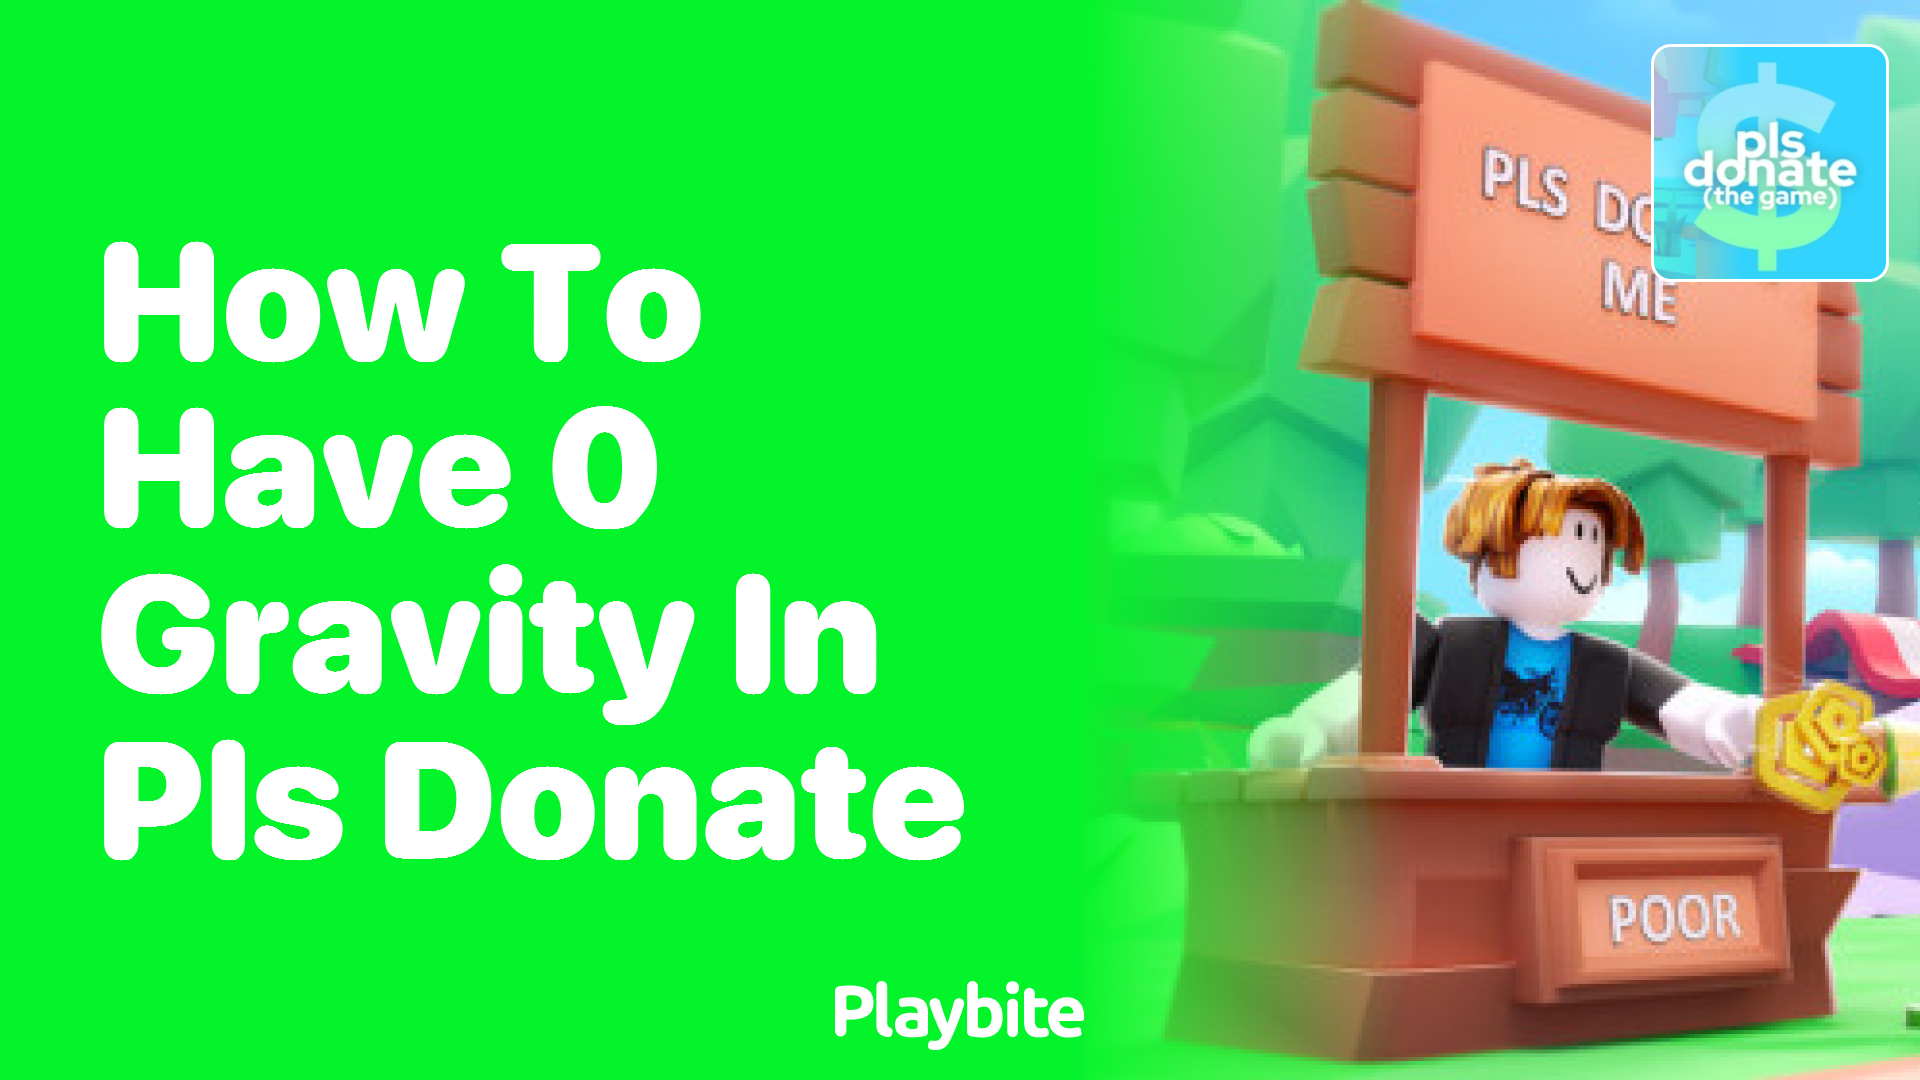 How to Have 0 Gravity in PLS DONATE on Roblox